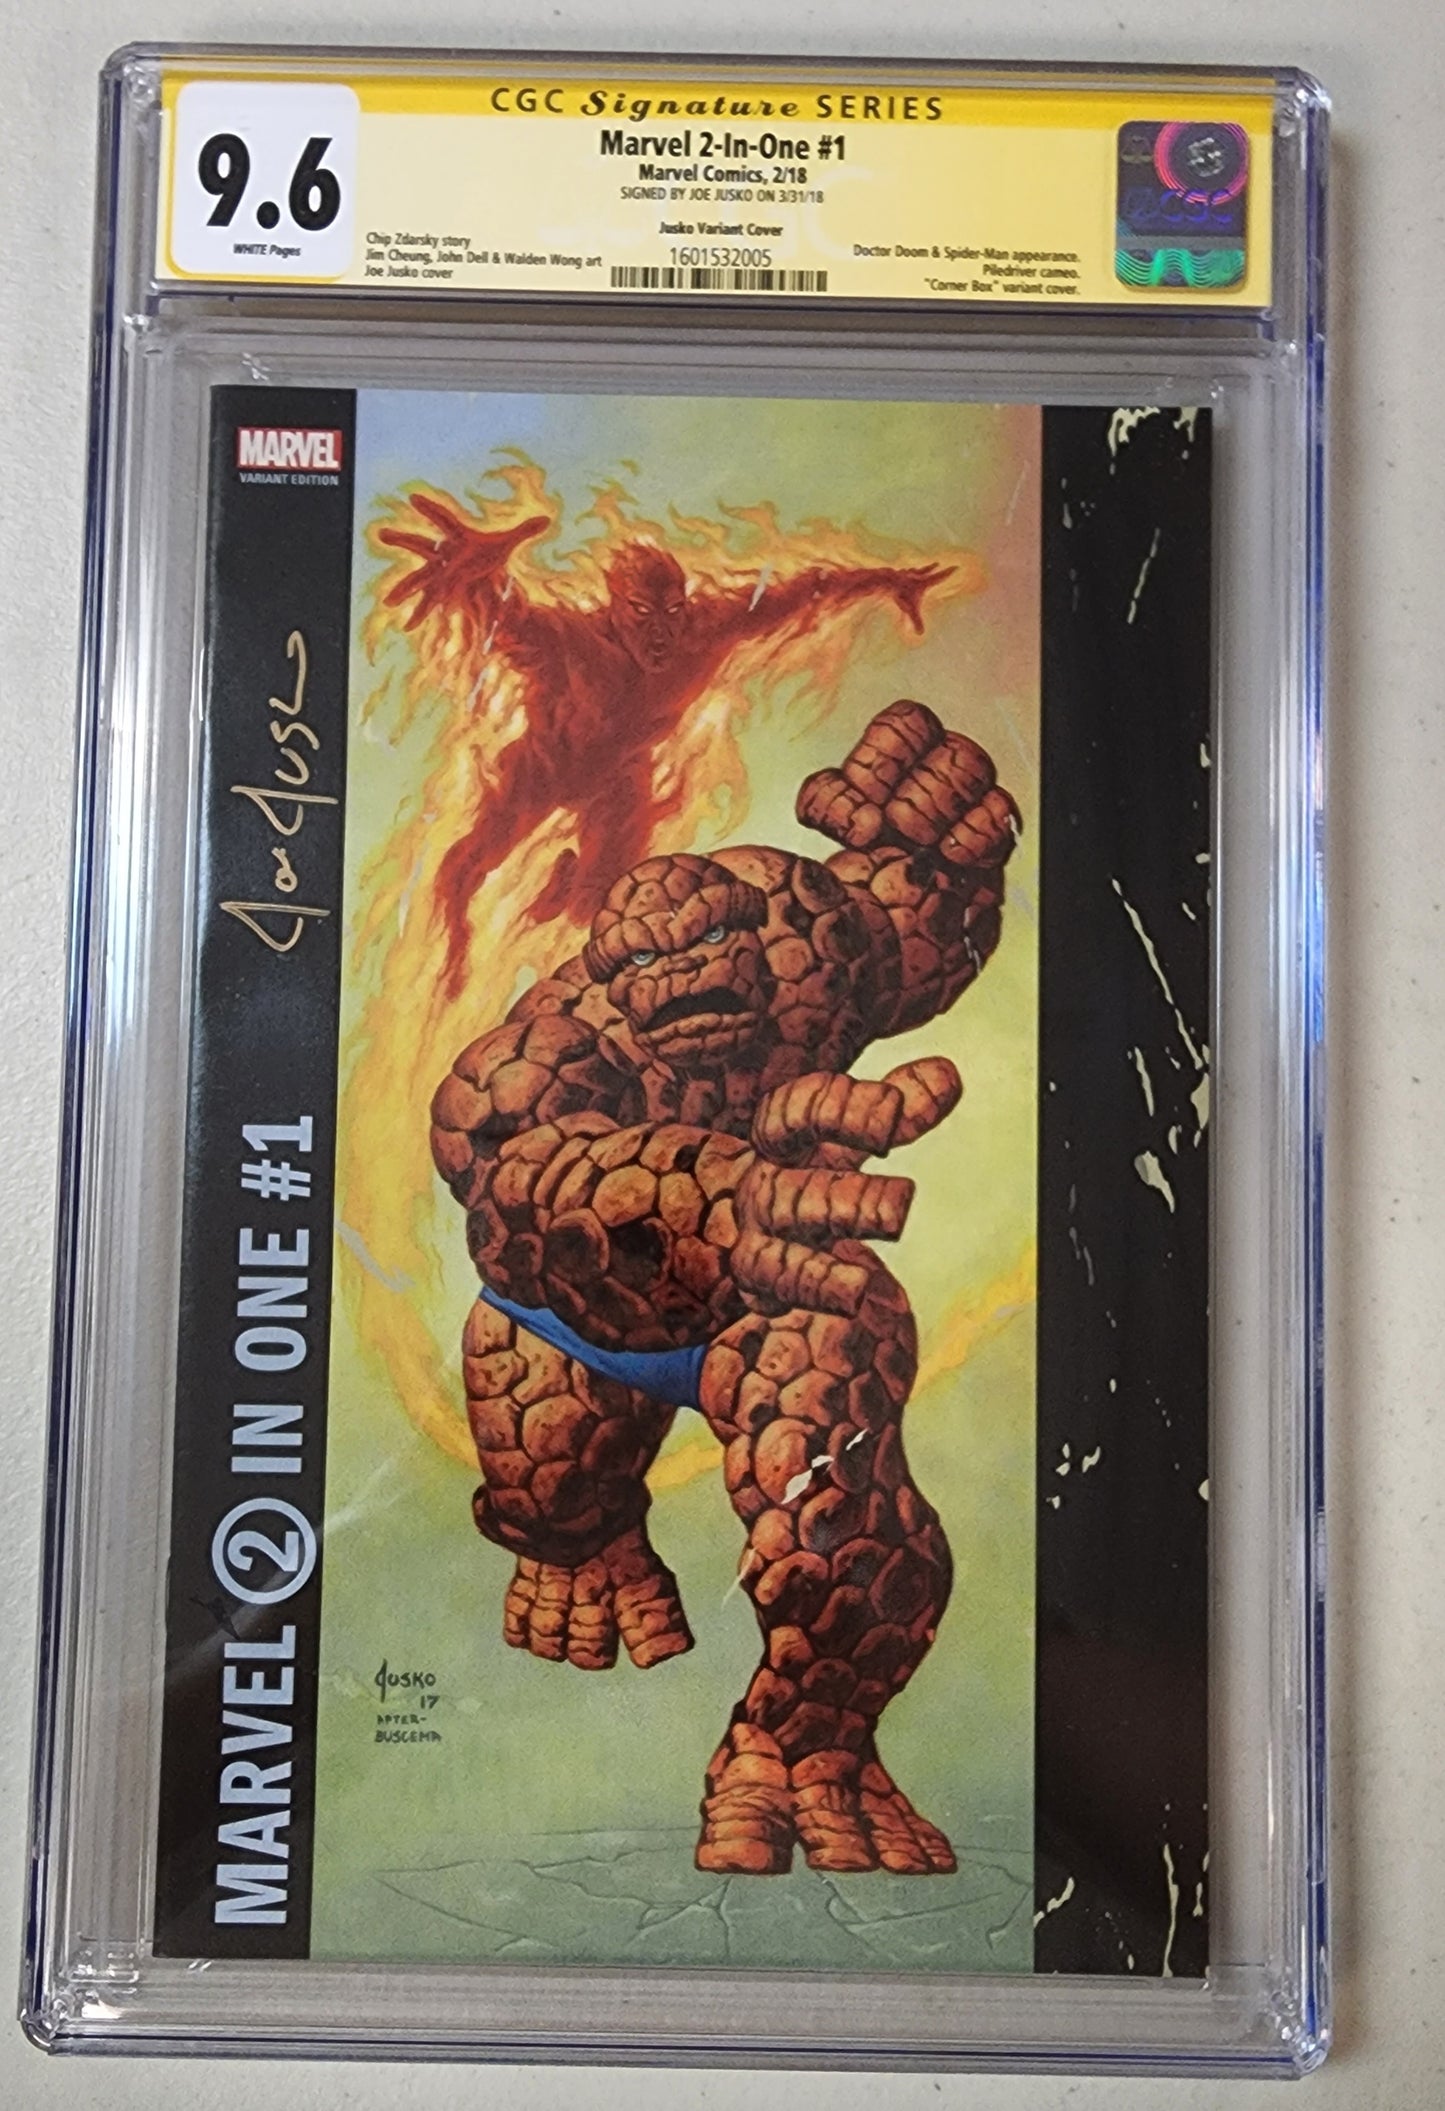 9.6 CGC MARVEL 2-IN-ONE #1 VARIANT SIGNED BY JOE JUSKO [1601532005]